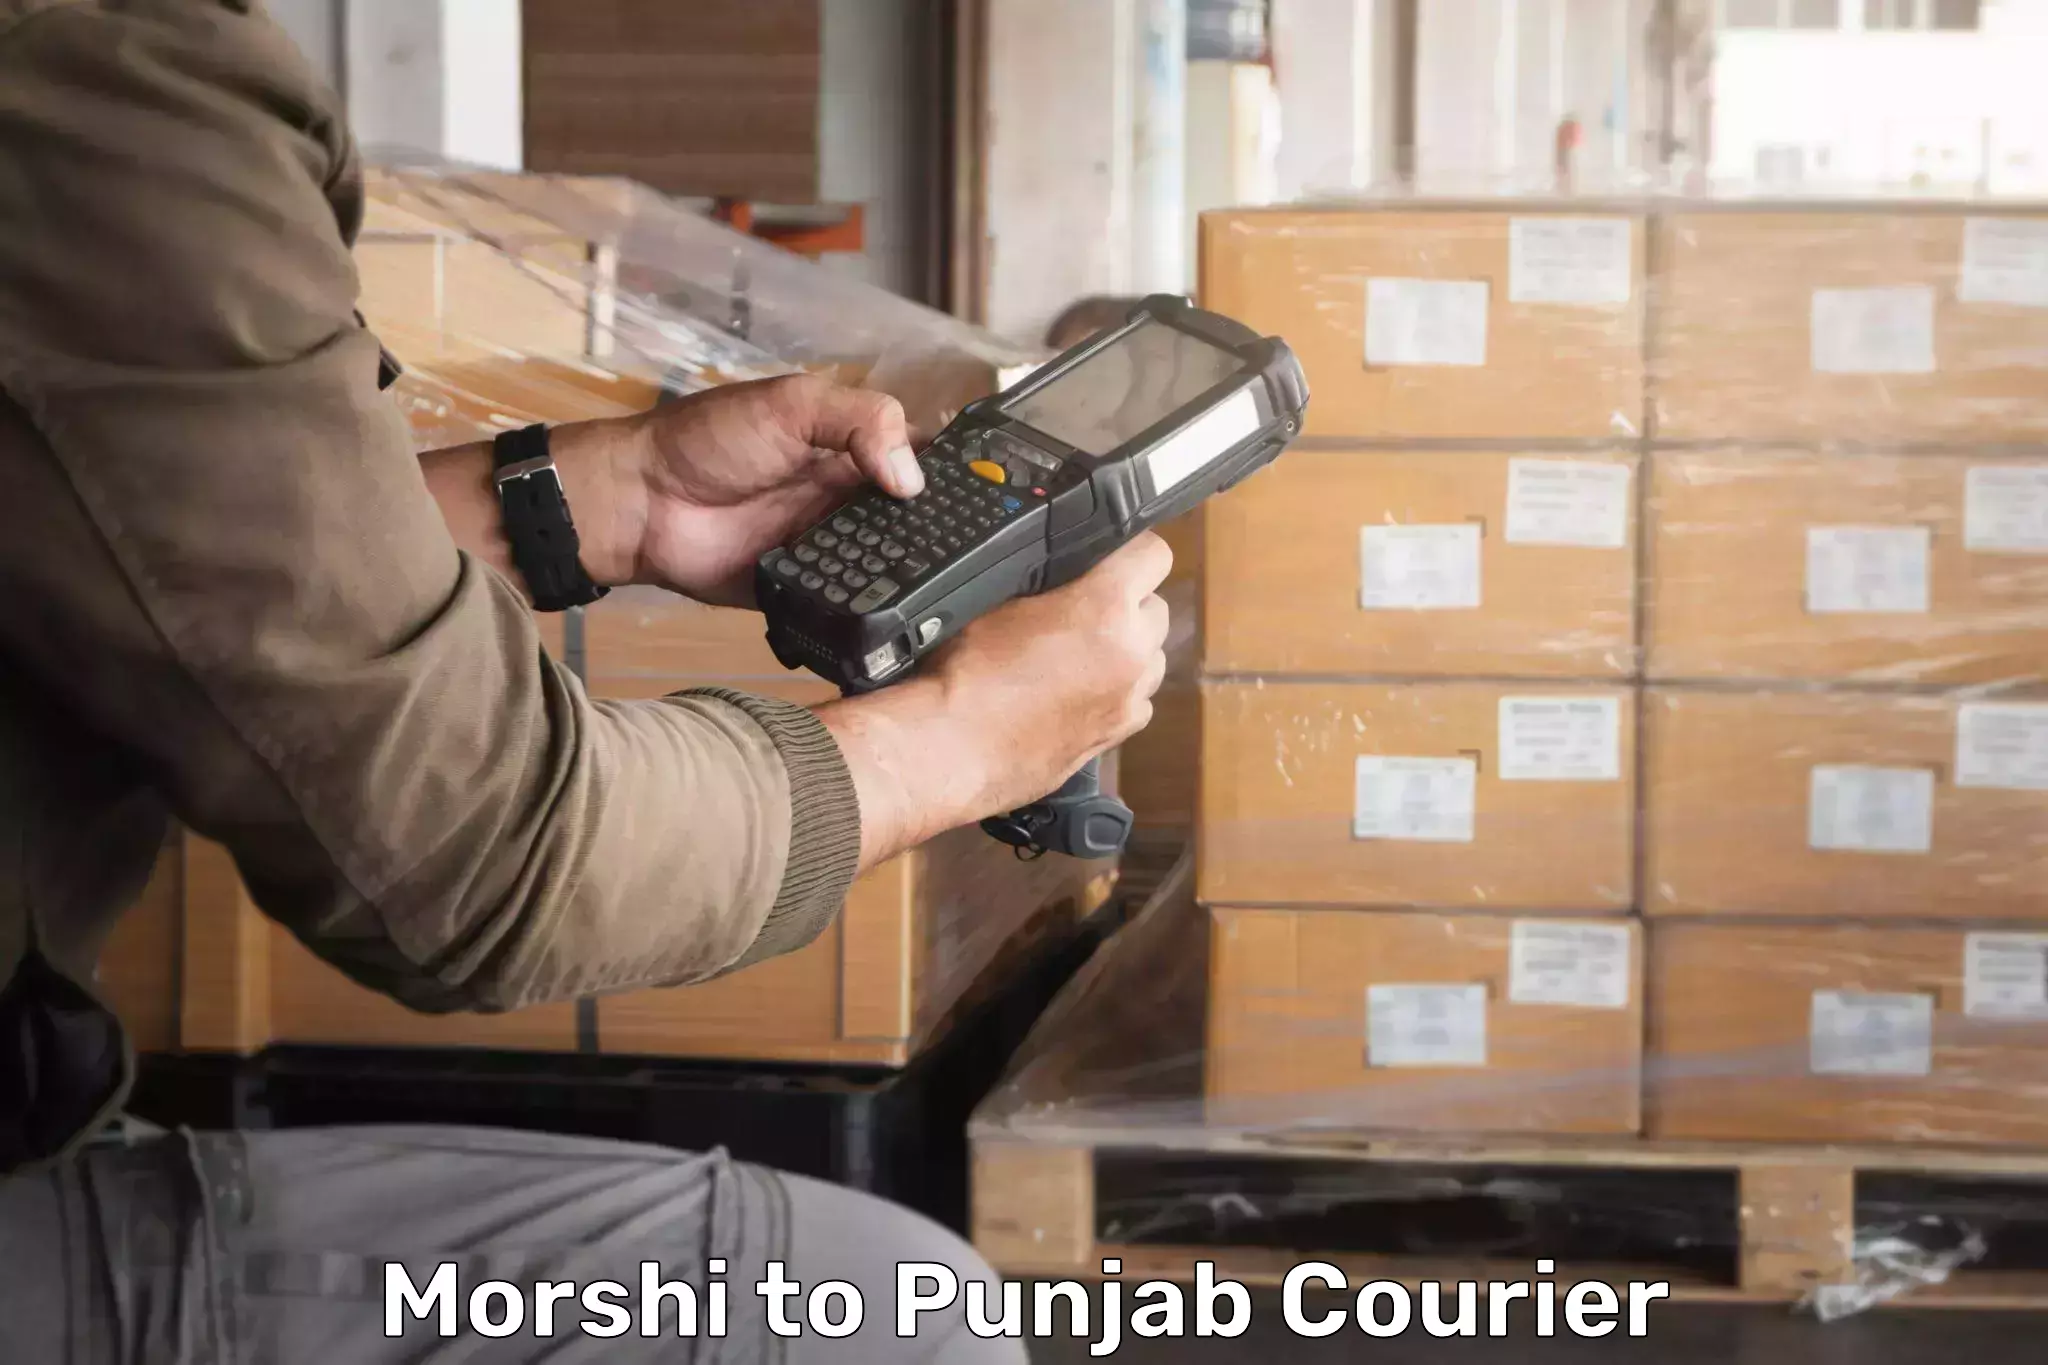 Flexible courier rates in Morshi to Amritsar